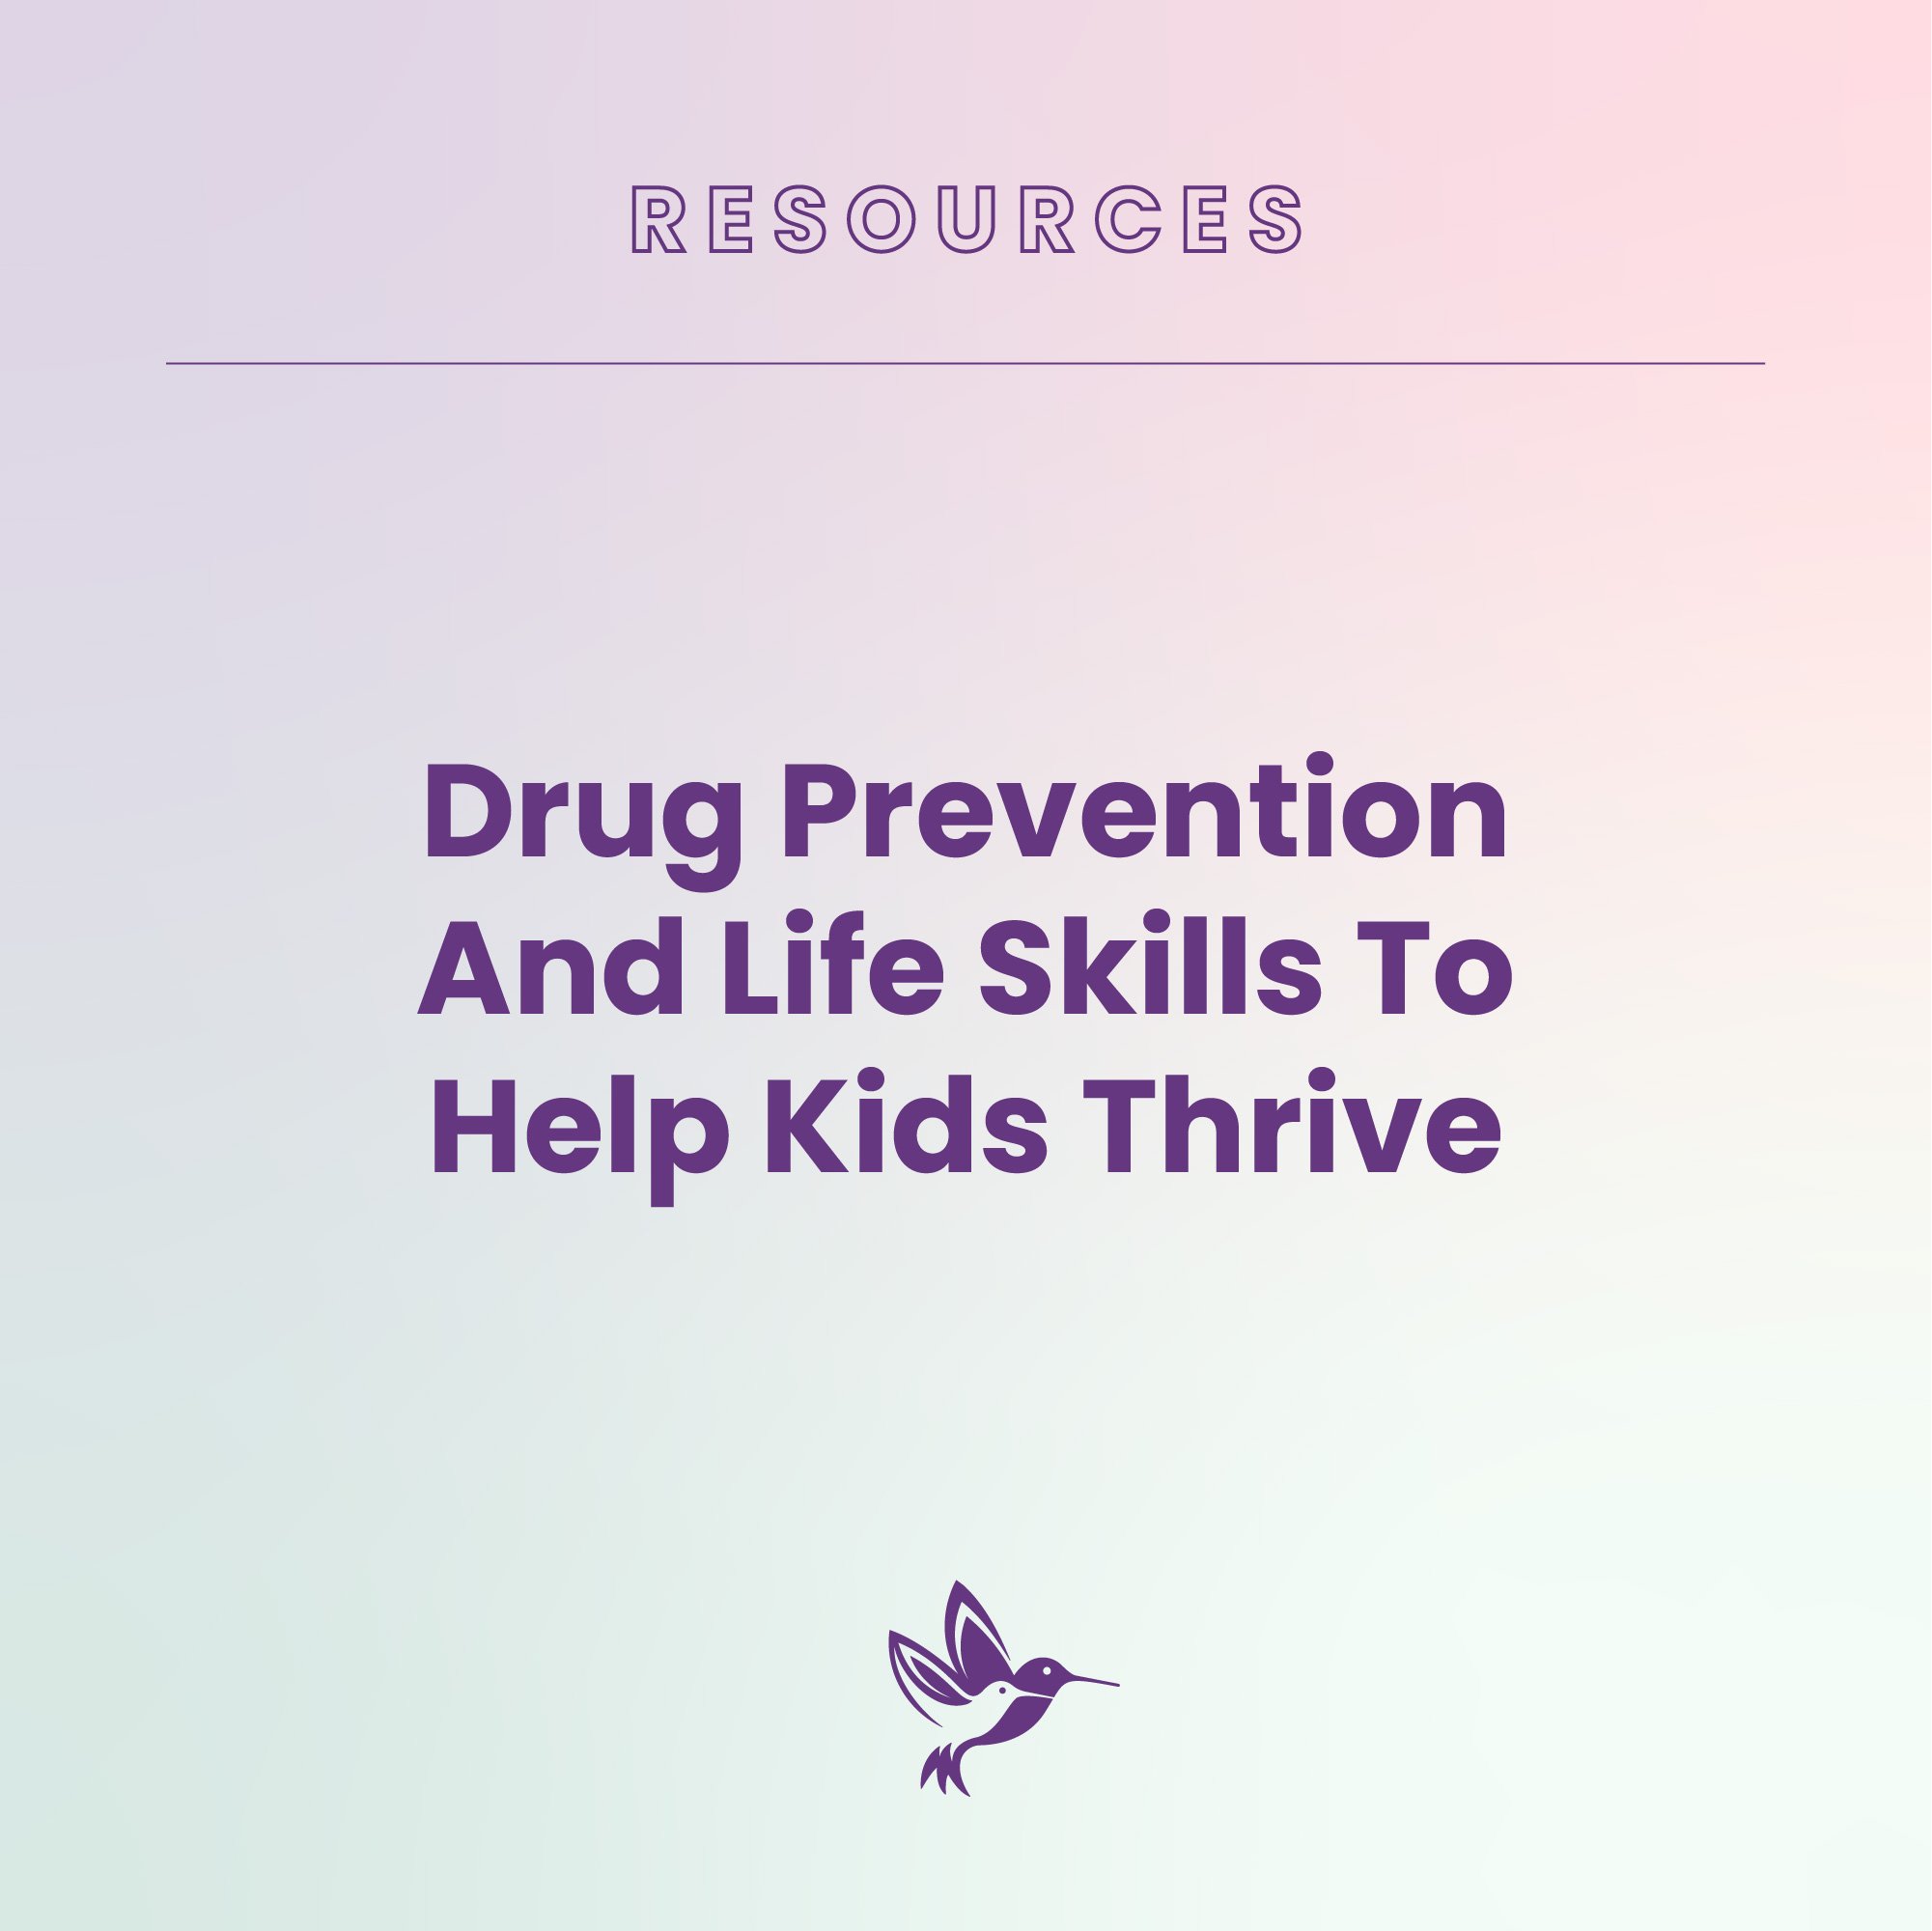 Drug Prevention And Life Skills To Help Kids Thrive (Copy)